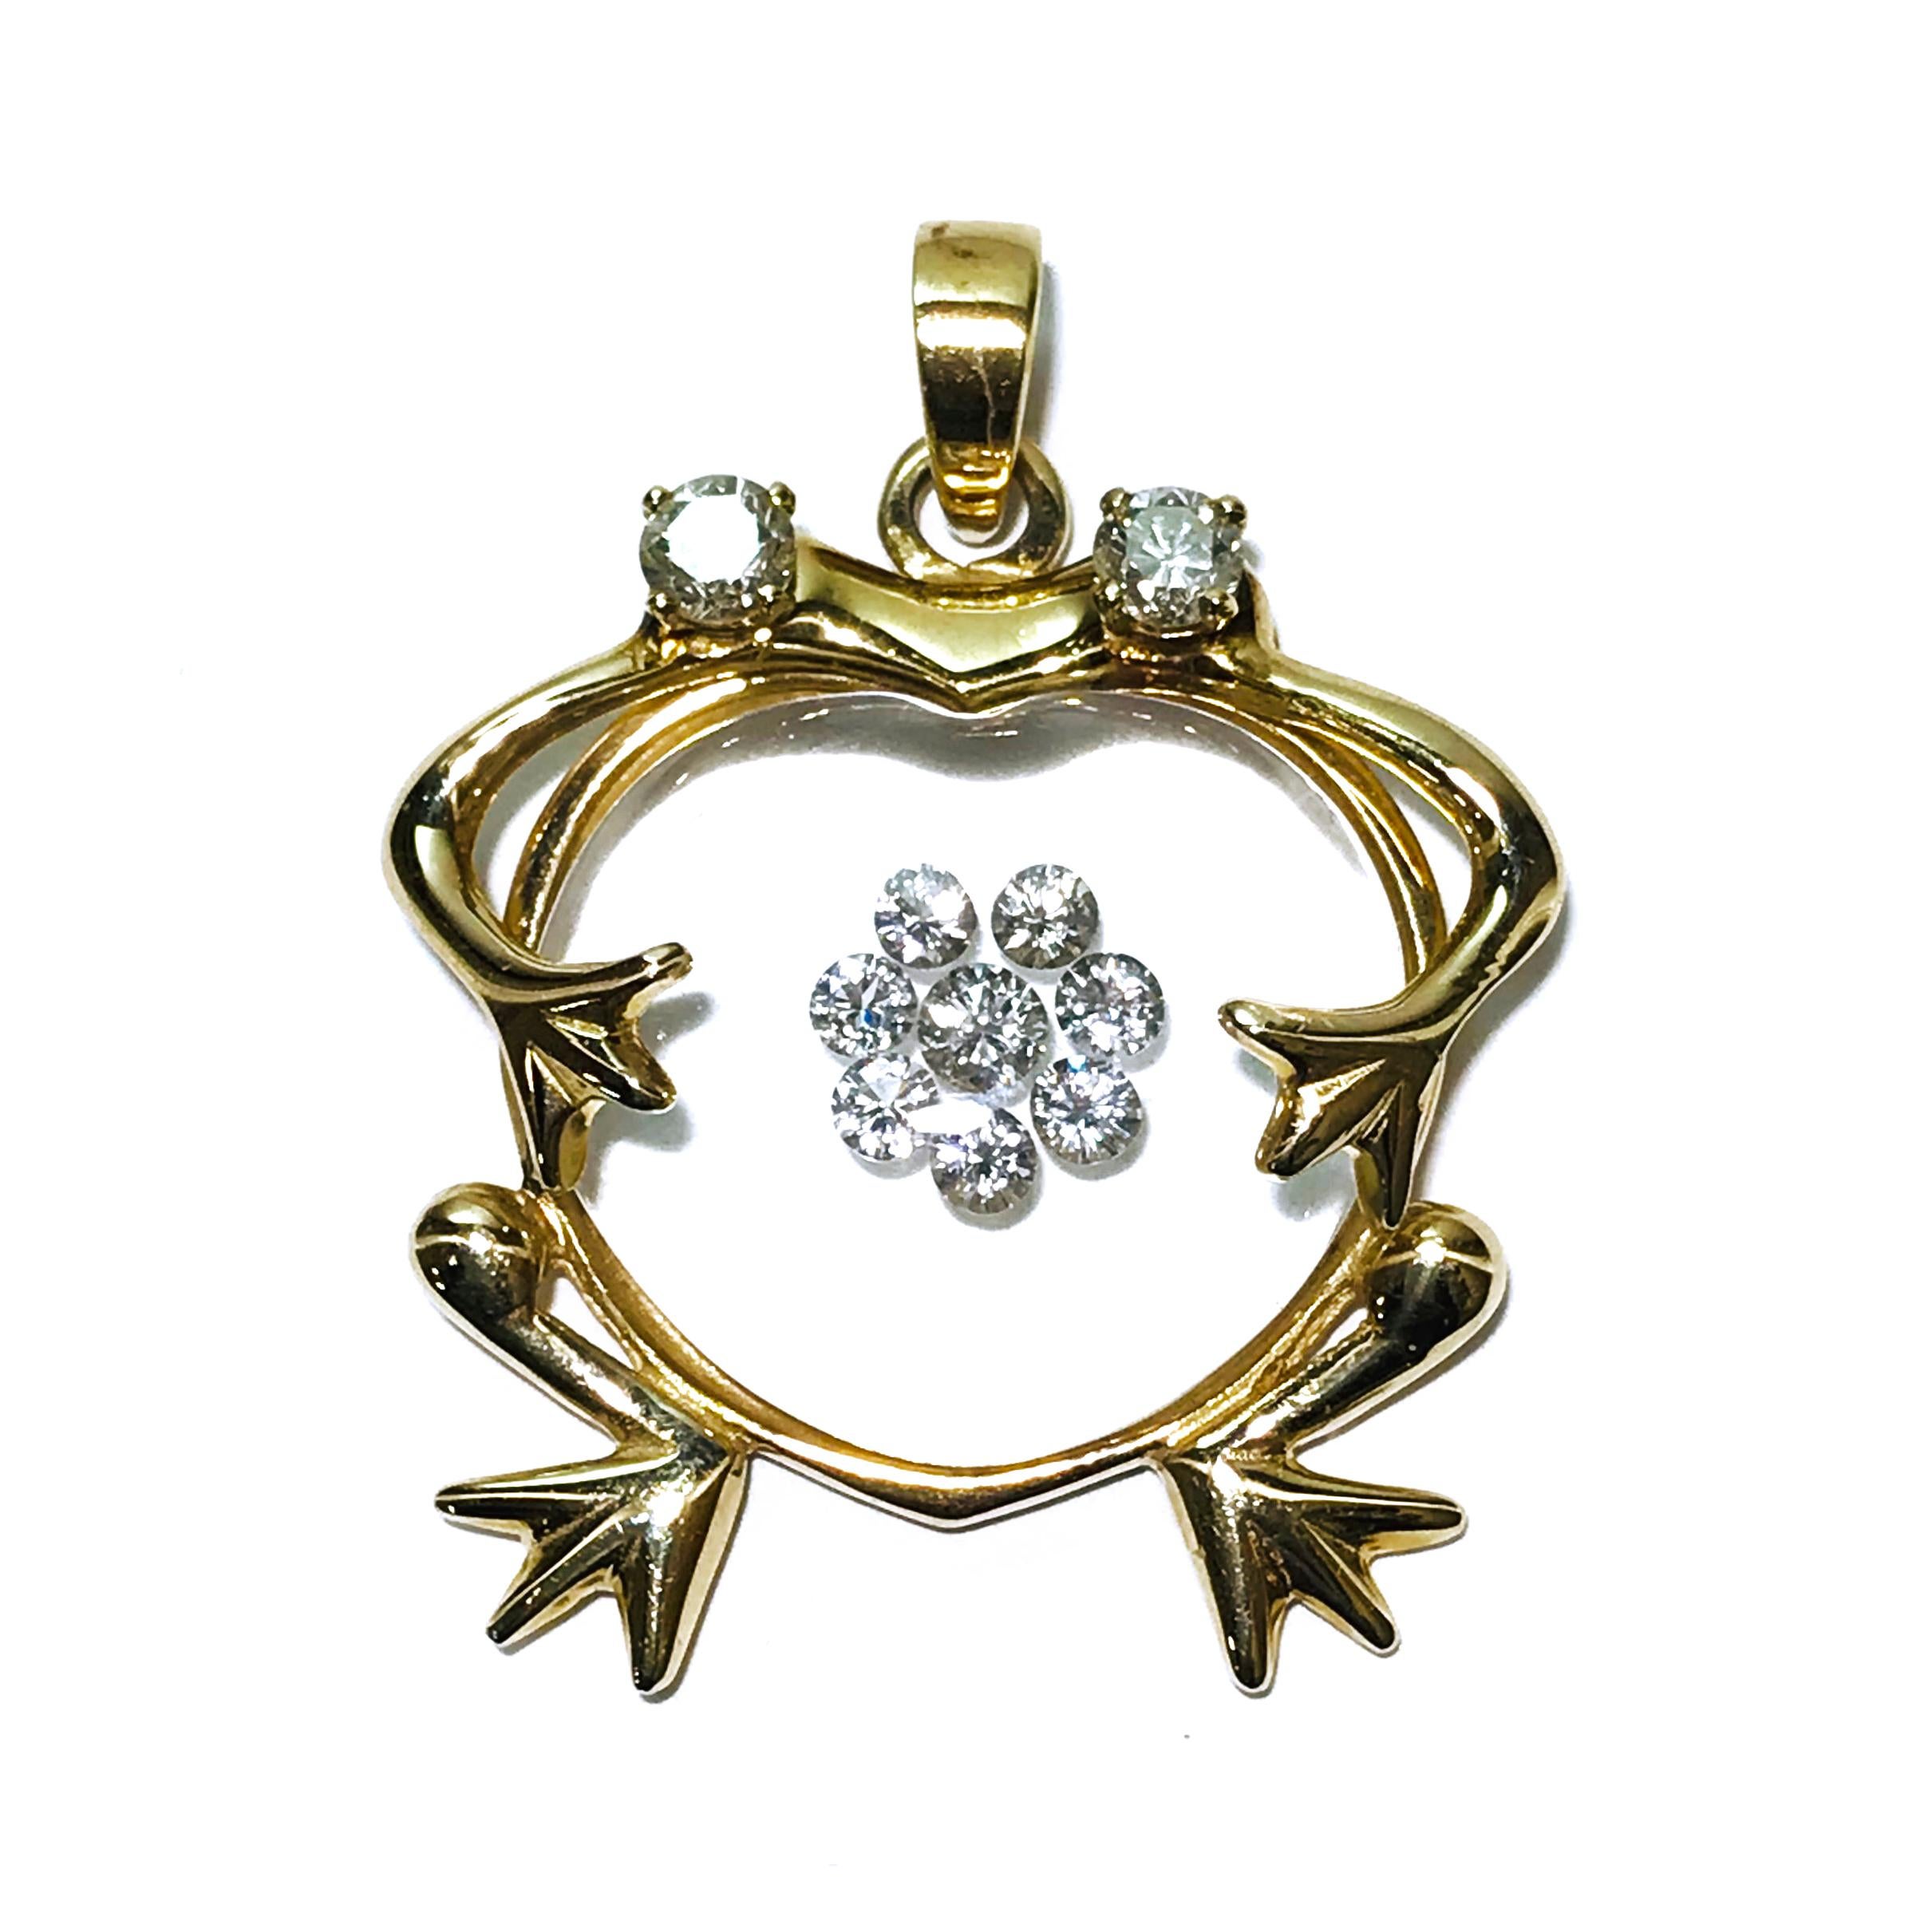 Incogem Floating Diamond Frog Pendant 14 Karat Gold. The pendant is handcrafted of recycled 14k yellow gold. The diamonds are brilliant cut, 58 facets, VS1 in clarity (G.I.A.) and G in color (G.I.A.). The diamonds floating in lucite on the frog body